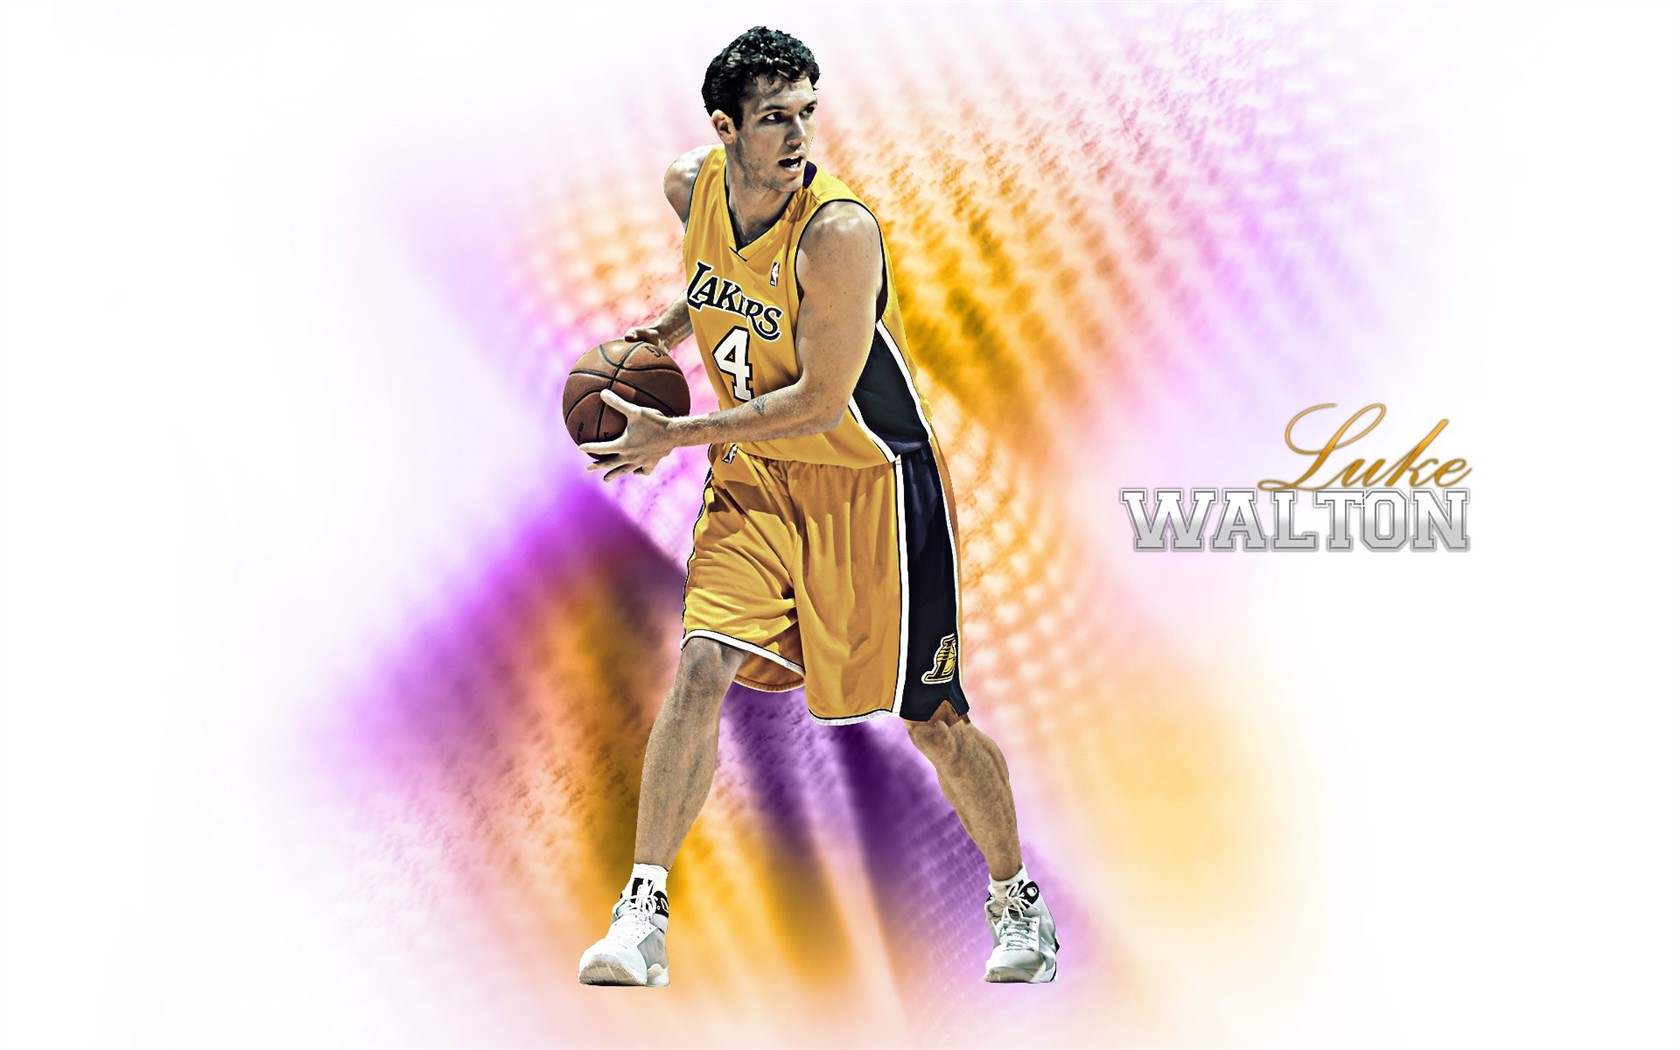 Los Angeles Lakers Wallpaper Oficial #19 - 1680x1050